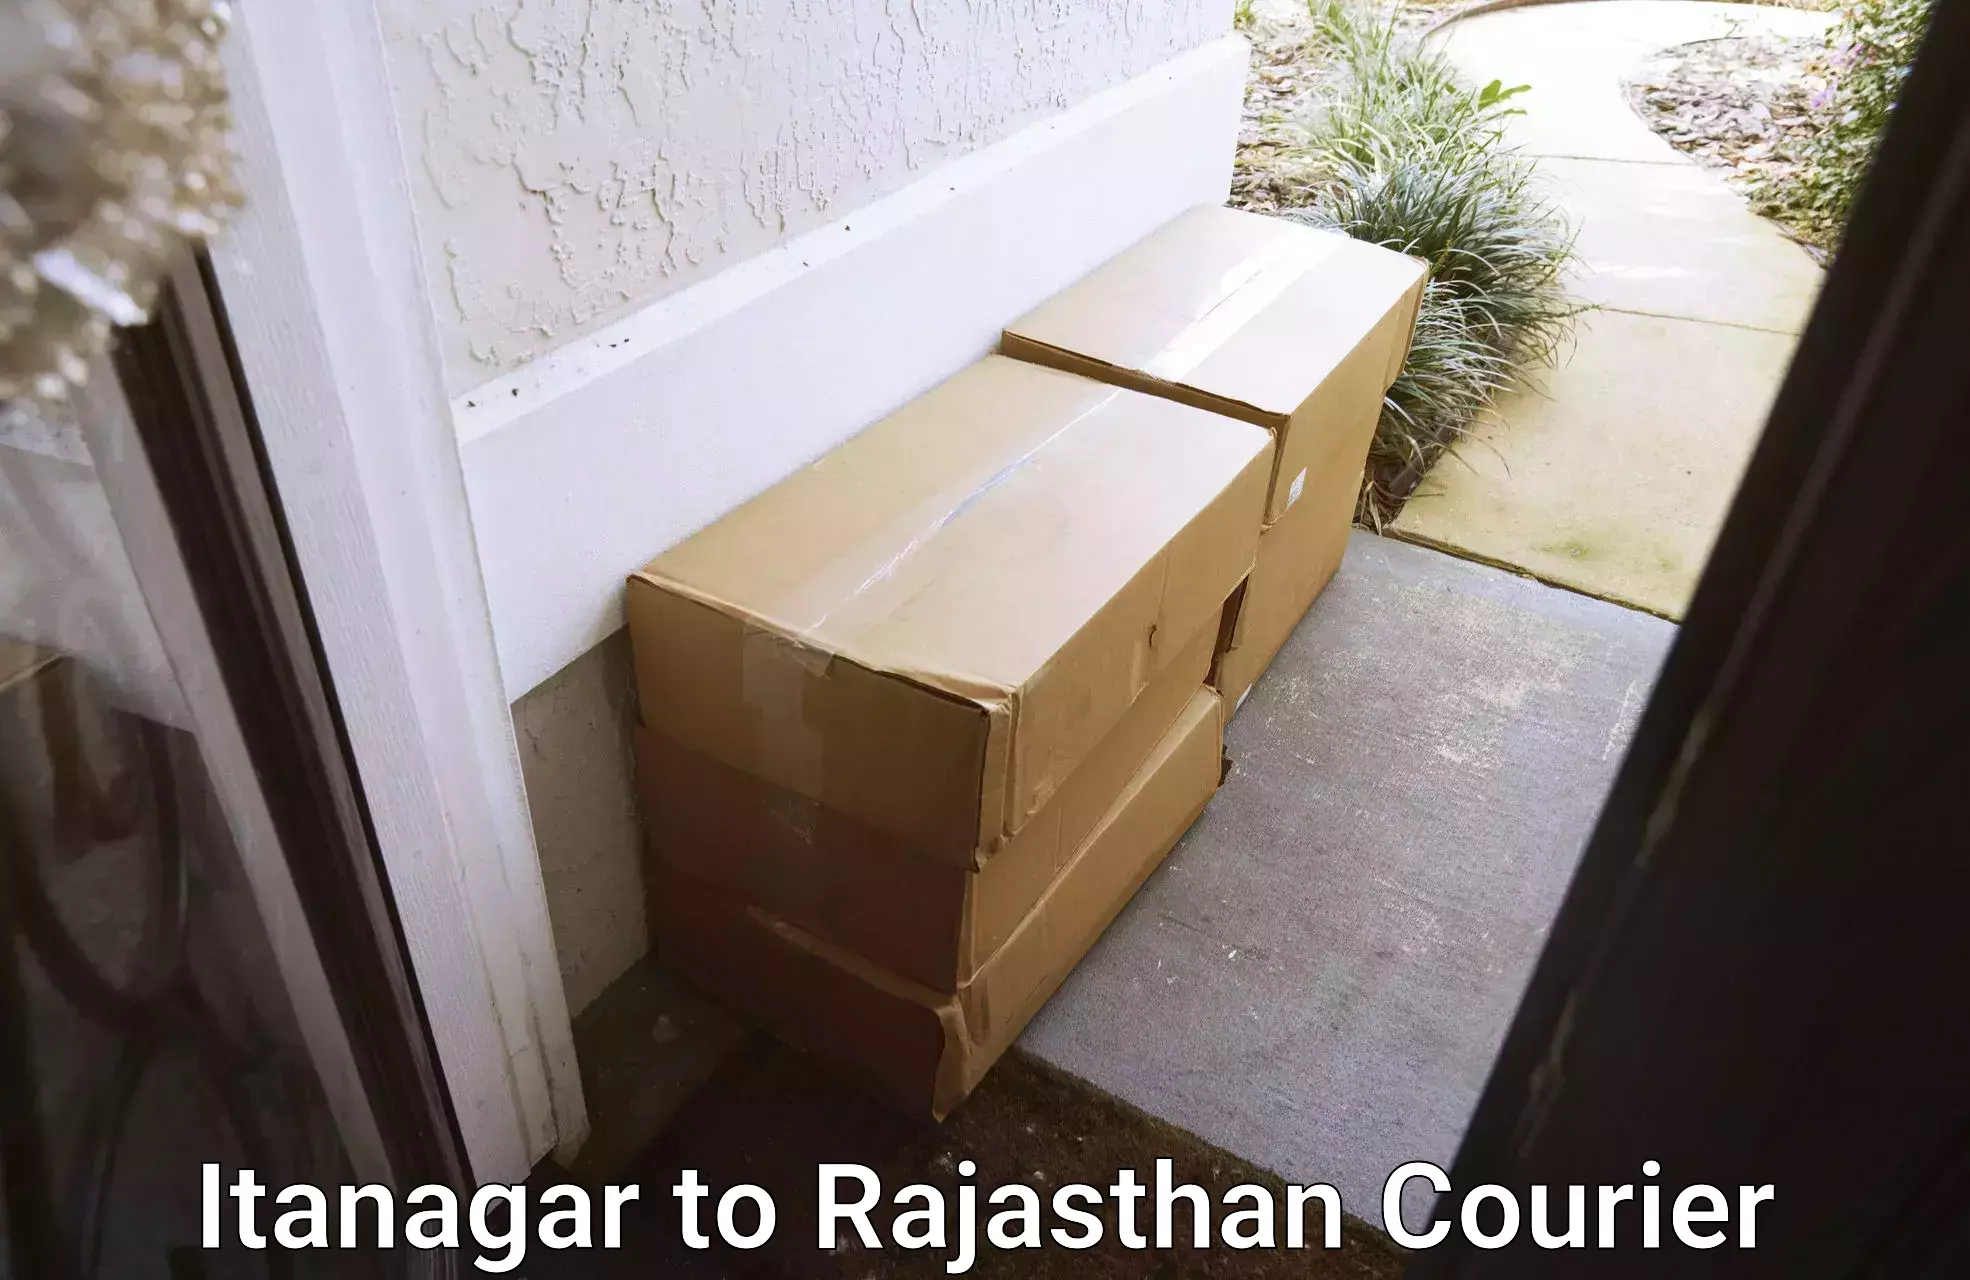 Round-the-clock parcel delivery Itanagar to Ramgarh Sikar